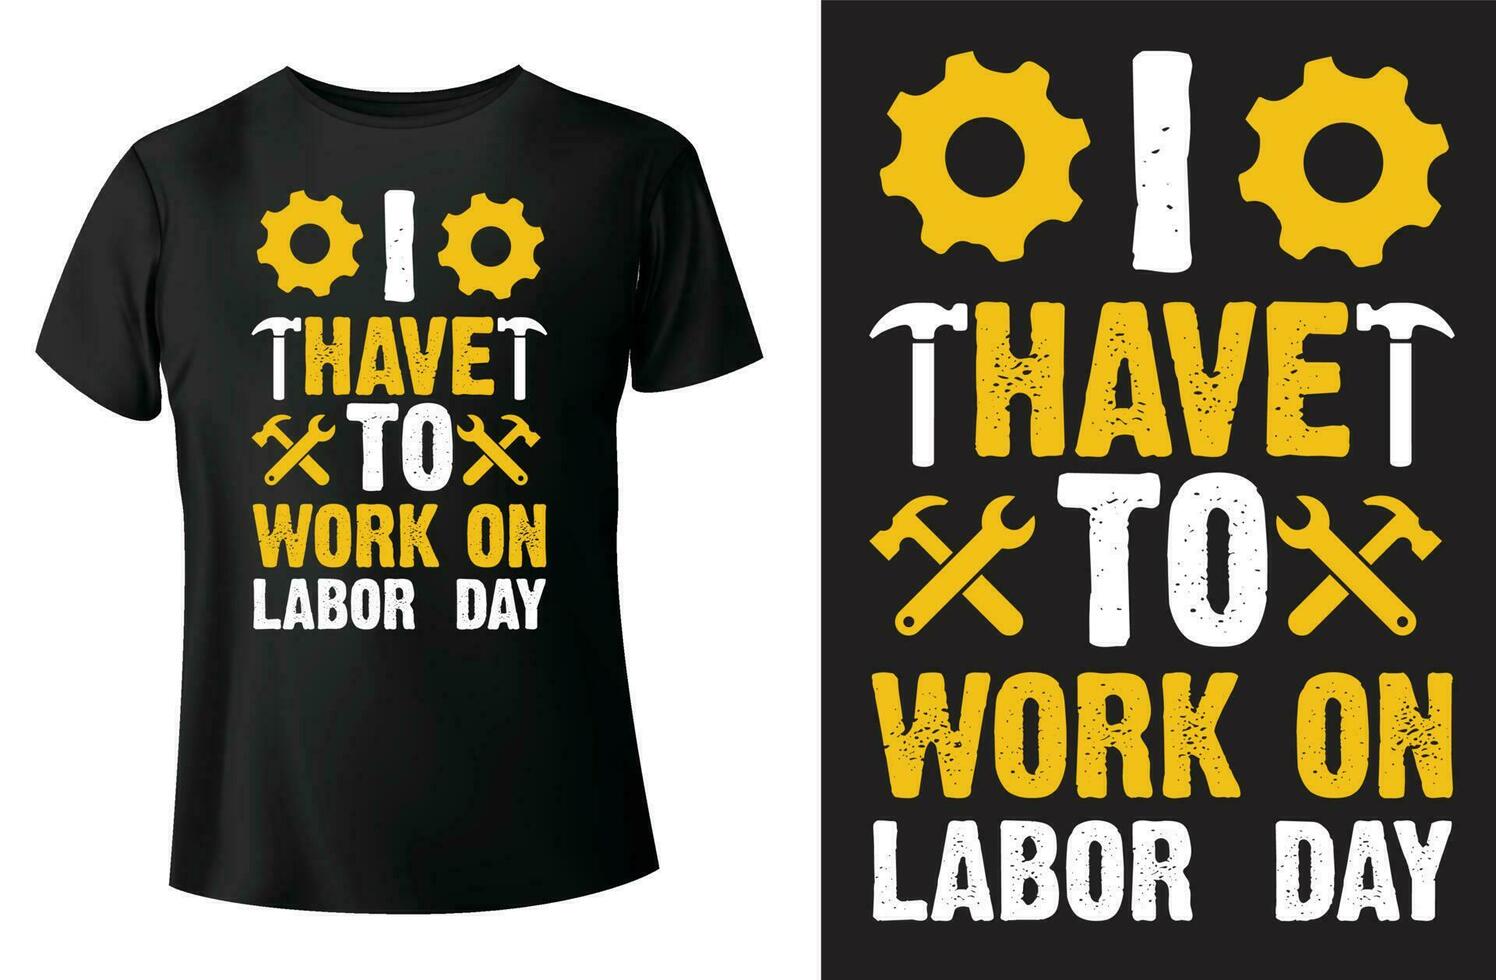 I have to work on labor  day, labor day t shirt design and vector-template vector